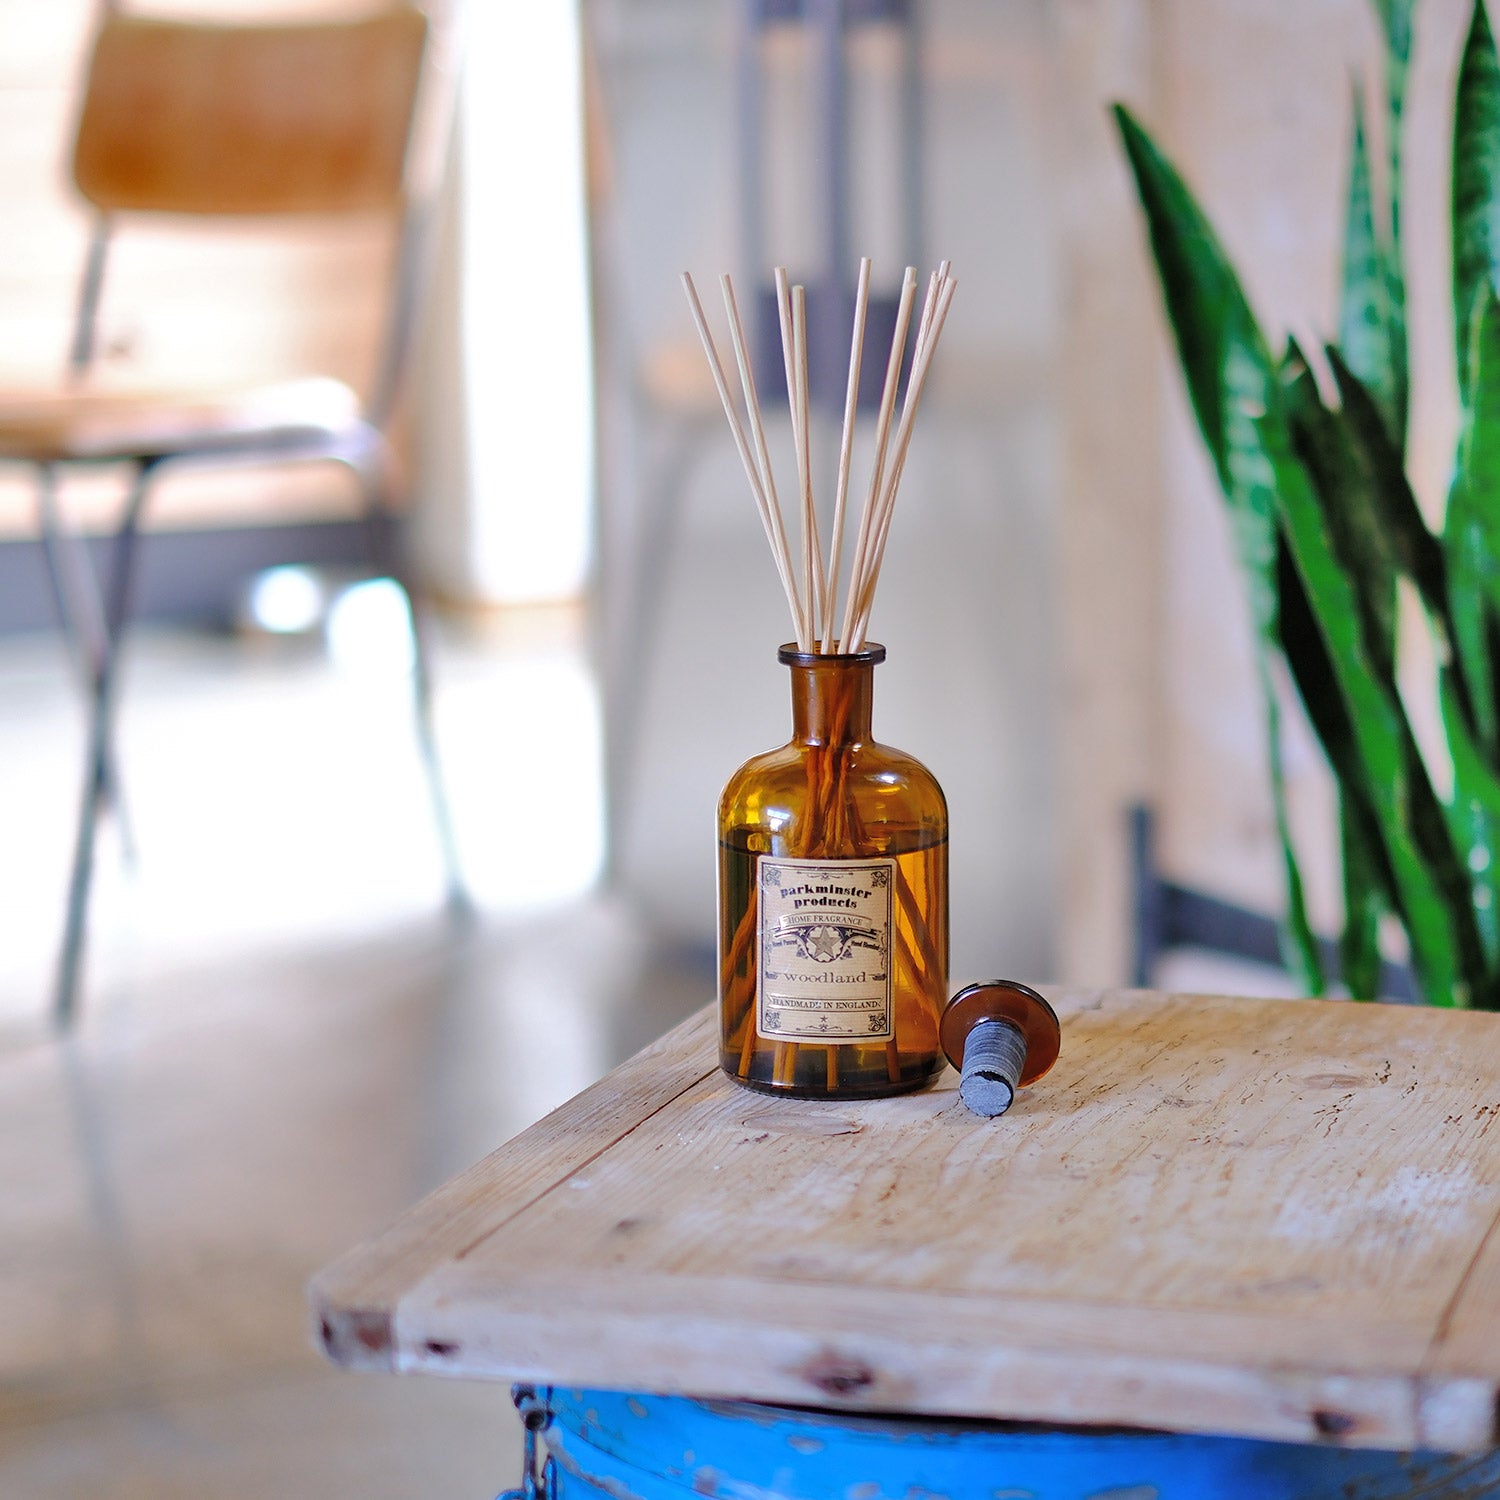 Enhance your space with the deep and evocative scent of Woodland from Parkminster's 200ml amber glass Apothecary Reed Diffuser. Made by hand in our Cornish workshop using 100% plant-based ingredients, this diffuser offers a modern and earthy fragrance experience with notes of smoke and wood